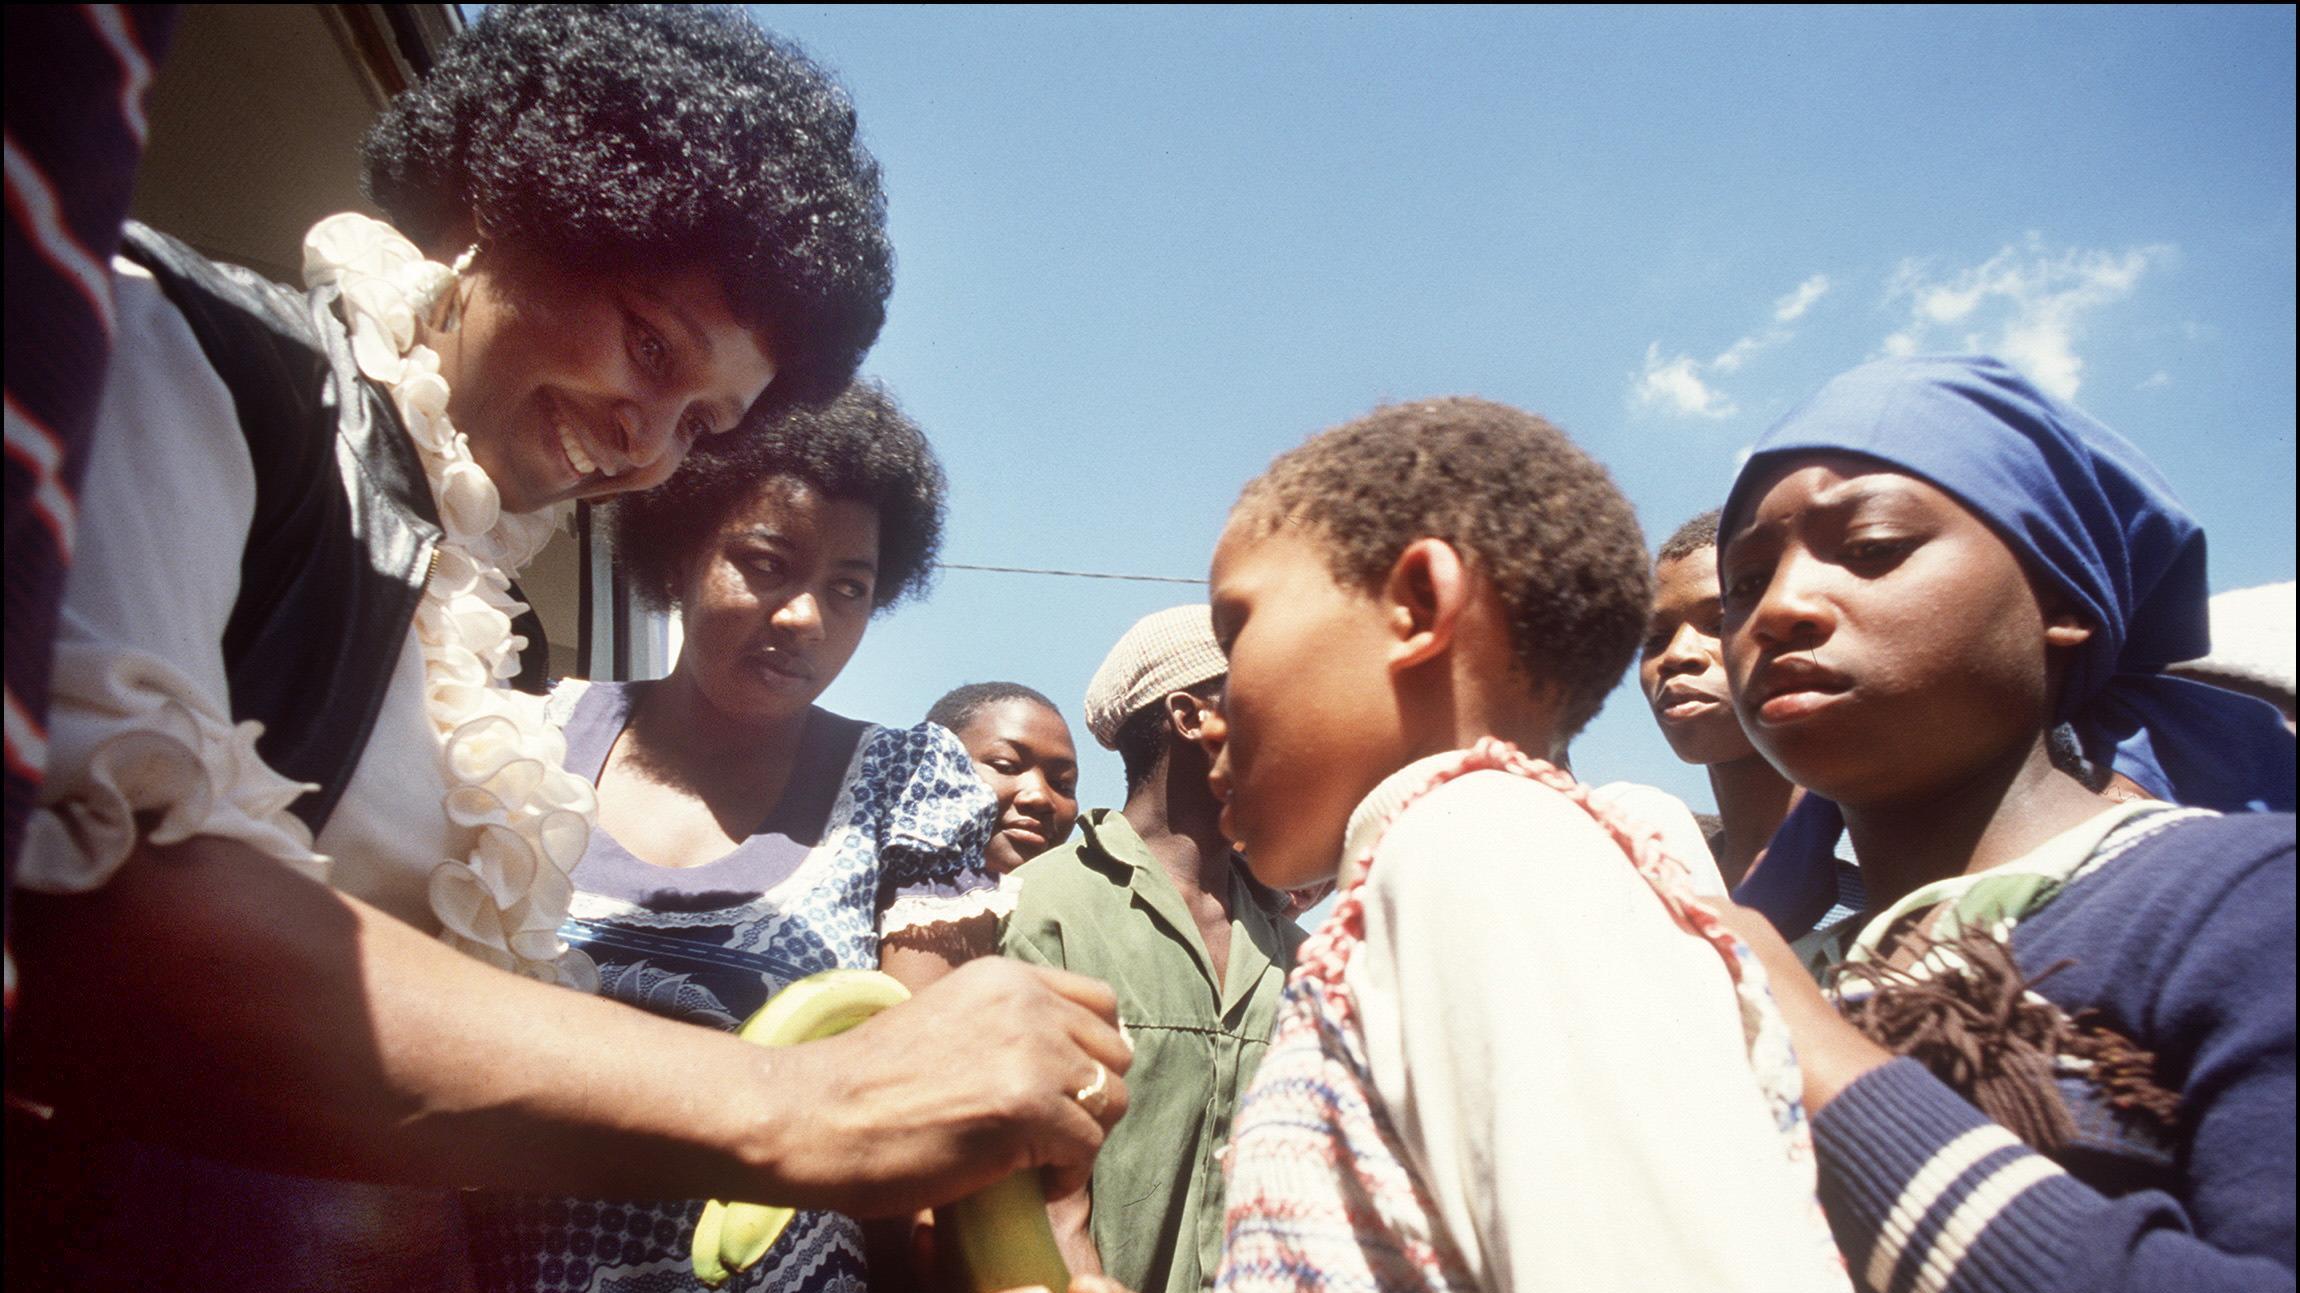 Winnie Madikizela-Mandela returns to the town of Brandfort, where she had been banished by the white government for nine years, to visit local children in 1986. CREDIT: GIDEON MENDEL